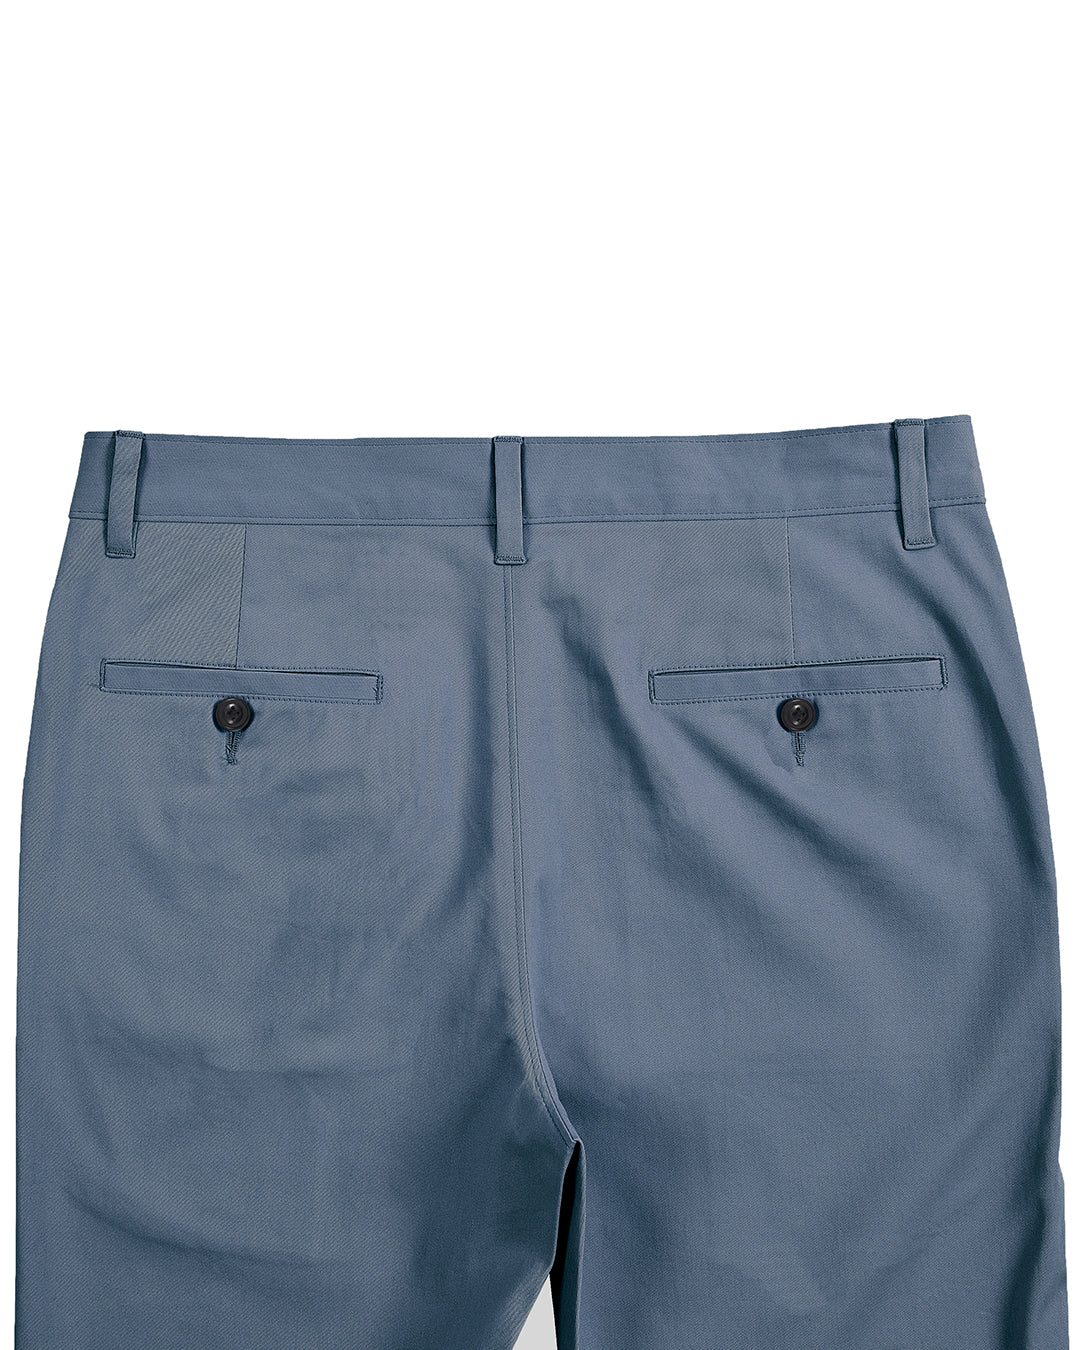 Back view of custom Genoa Chino pants for men by Luxire in blueish grey